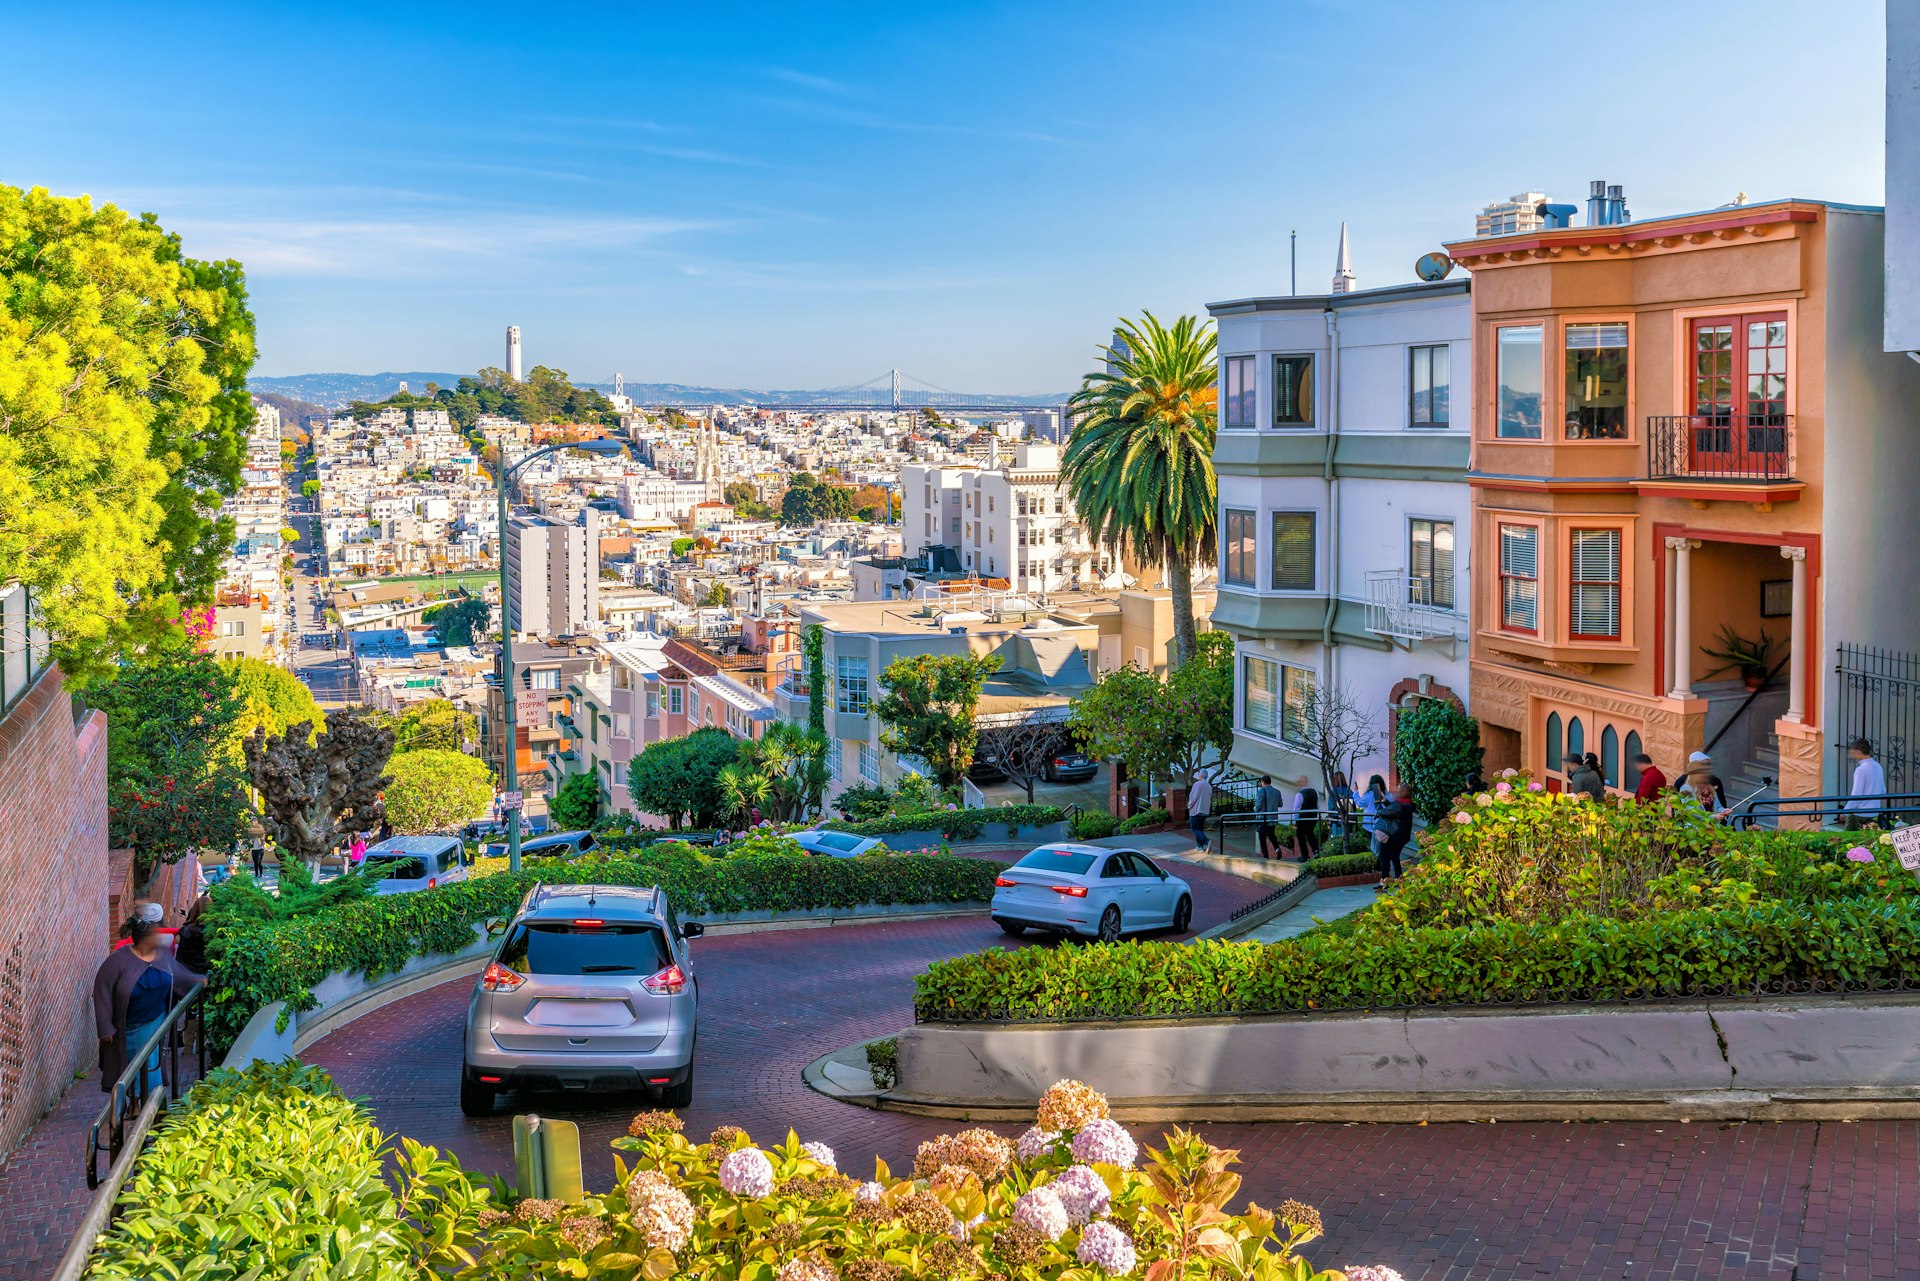 Cars driving through the hairpin turns of Lombard Street